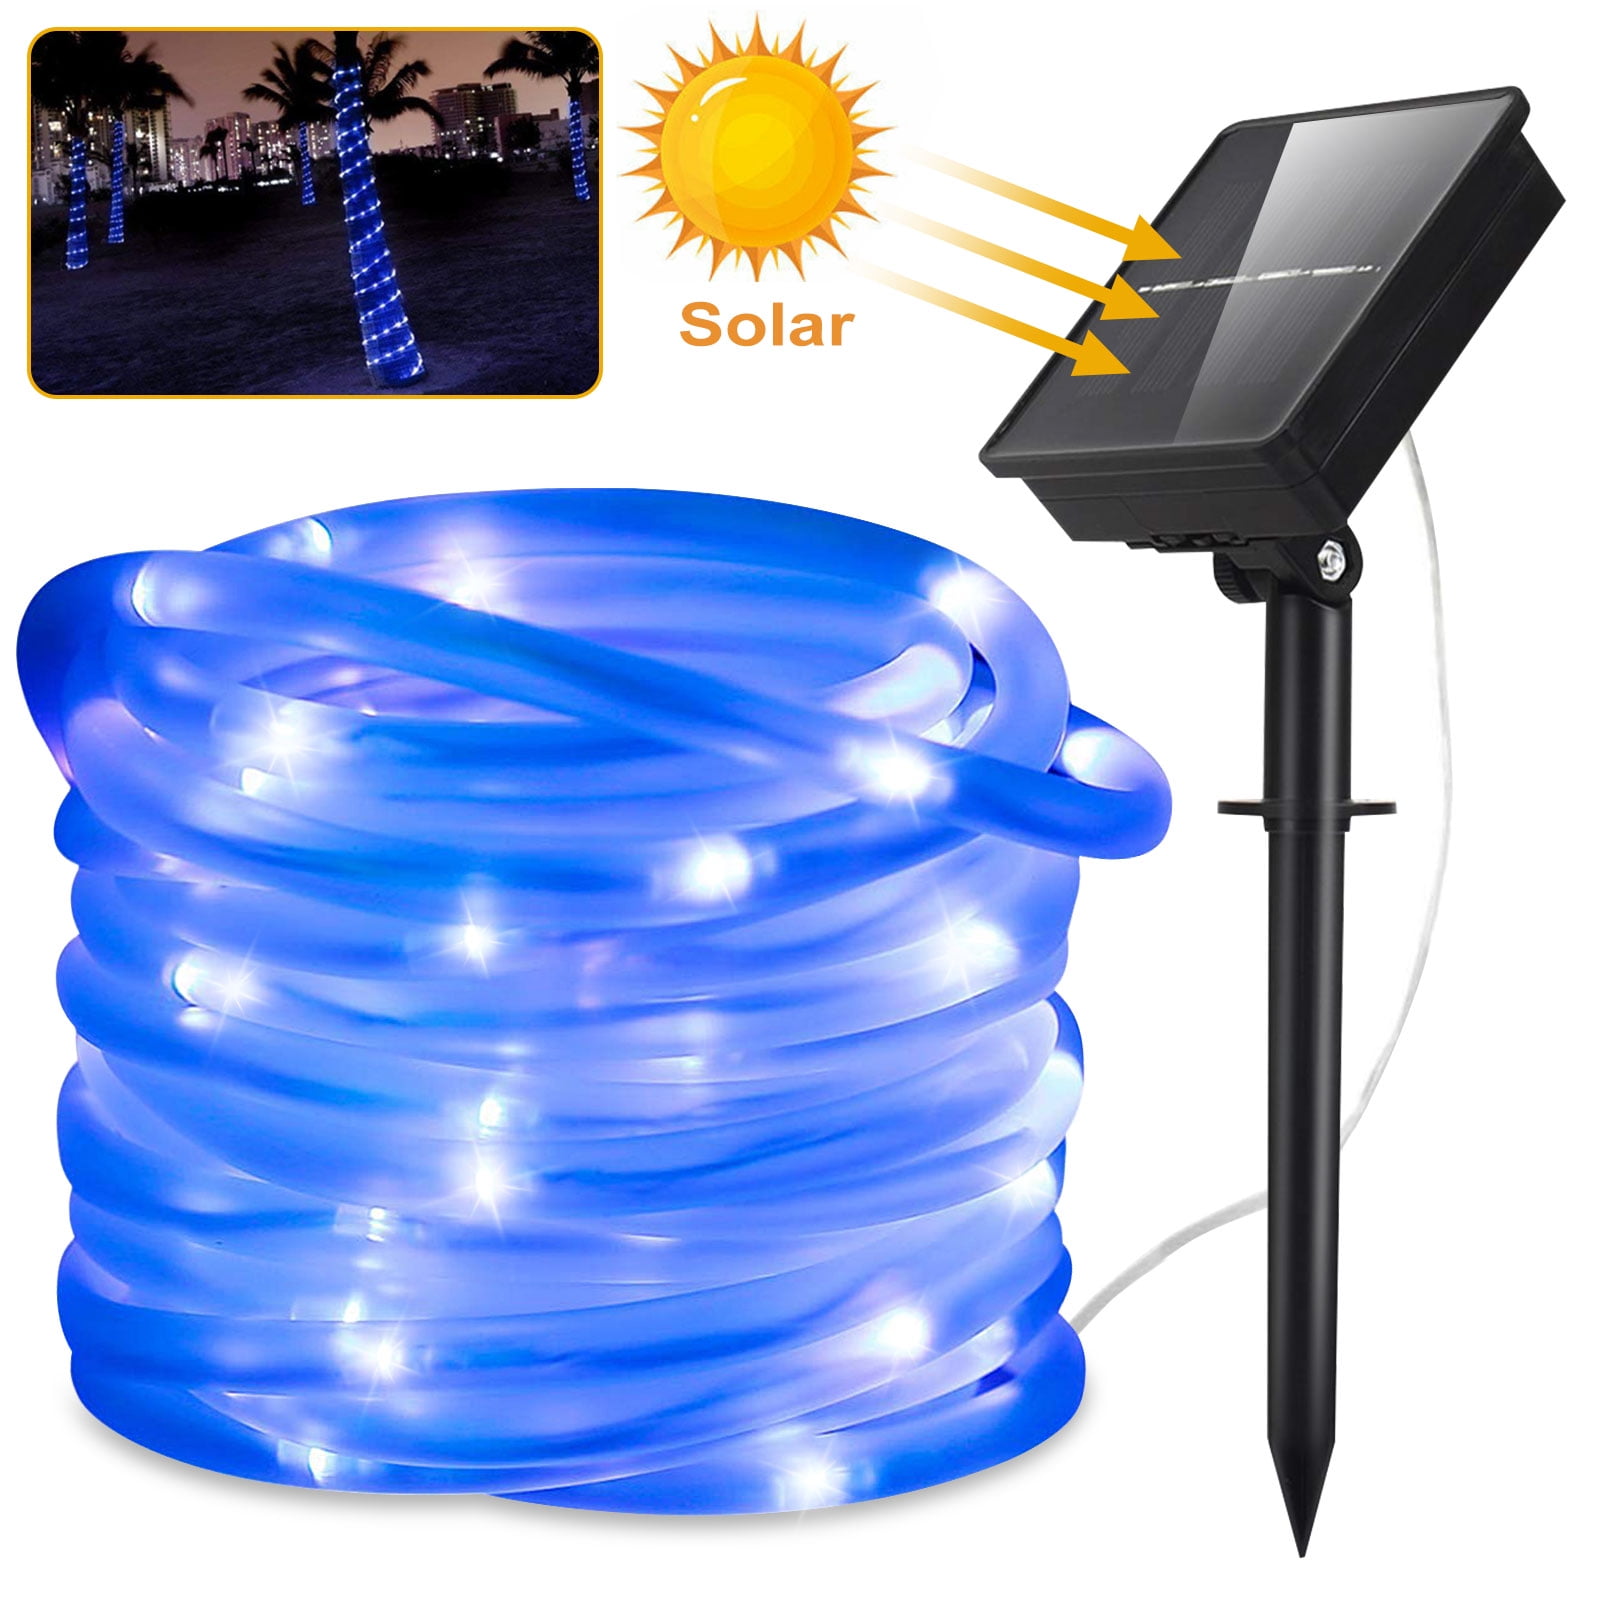 DULEE Solar Powered Outdoor Waterproof LED Rope Lights 10M 100 LED Neon Tube Strip String Fairy Lights,Colorful